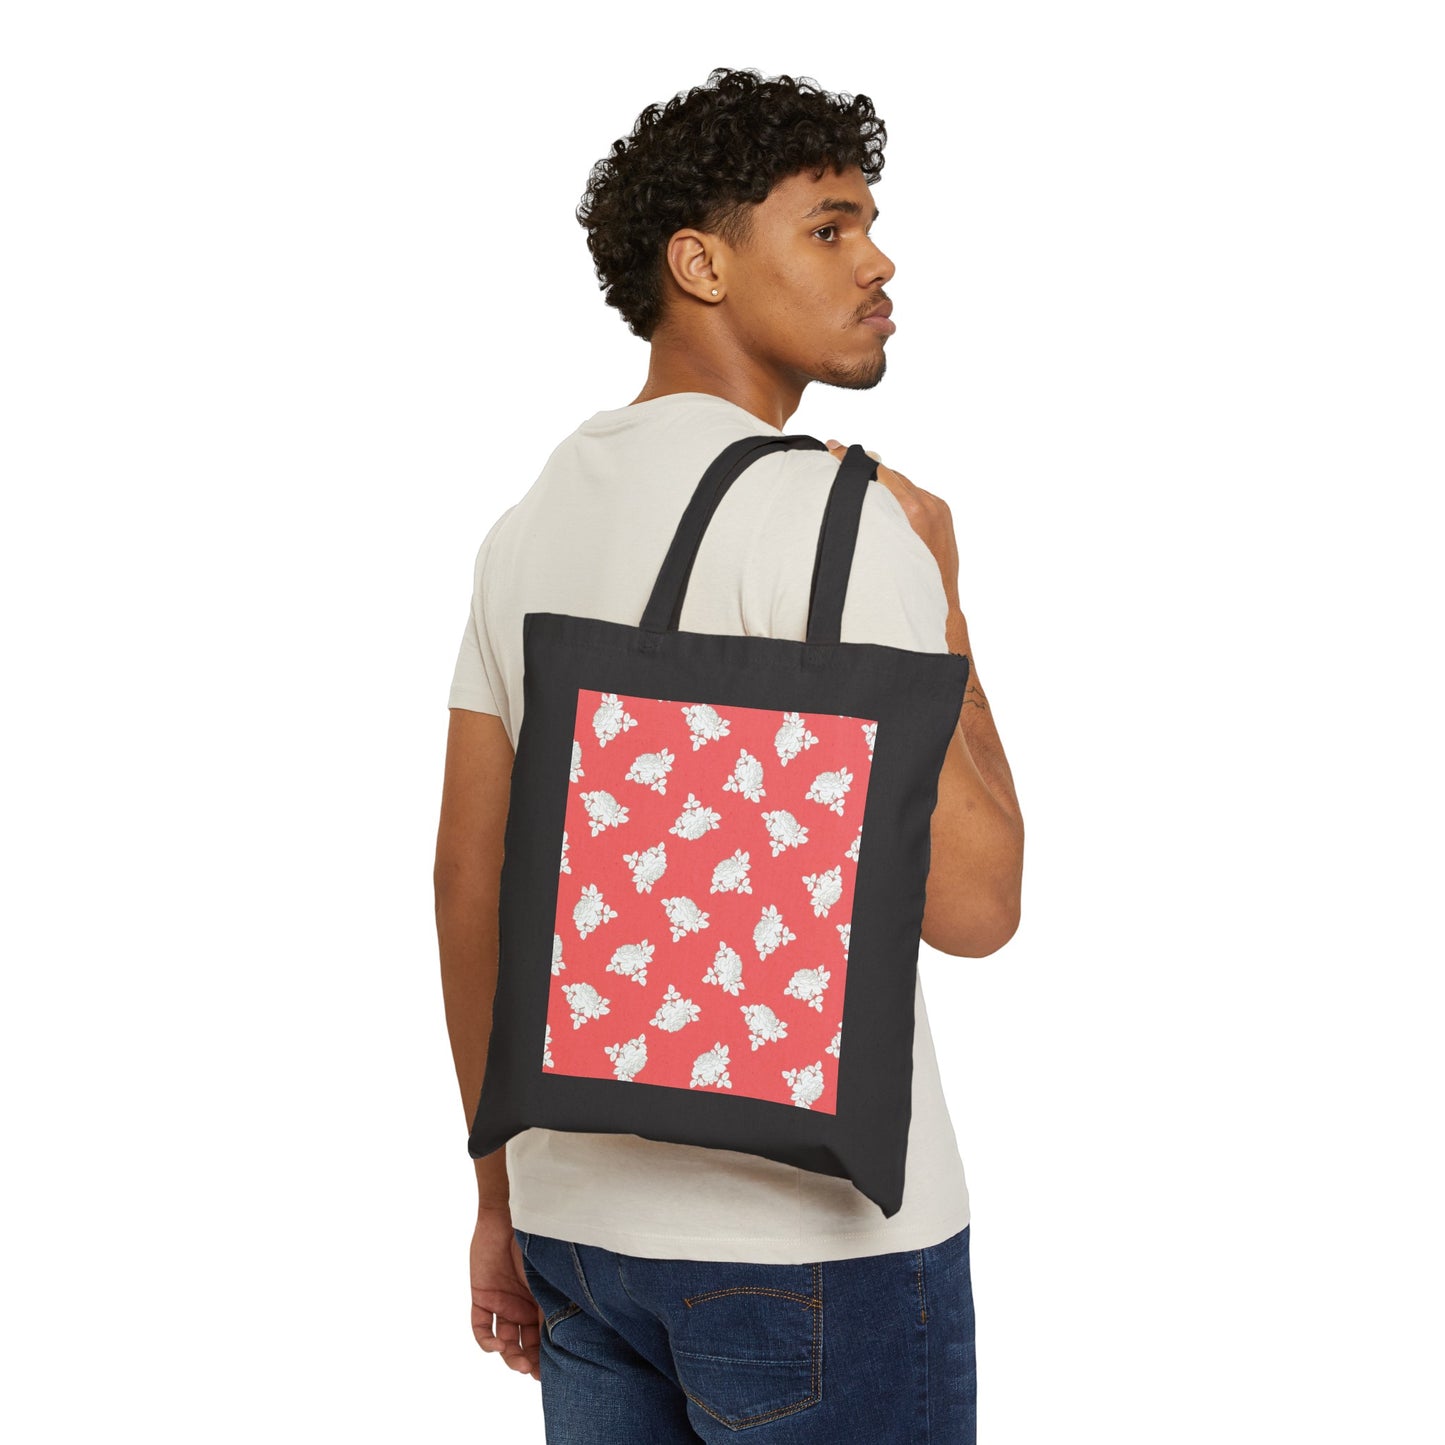 Cream Roses on Coral Cotton Canvas Tote Bag